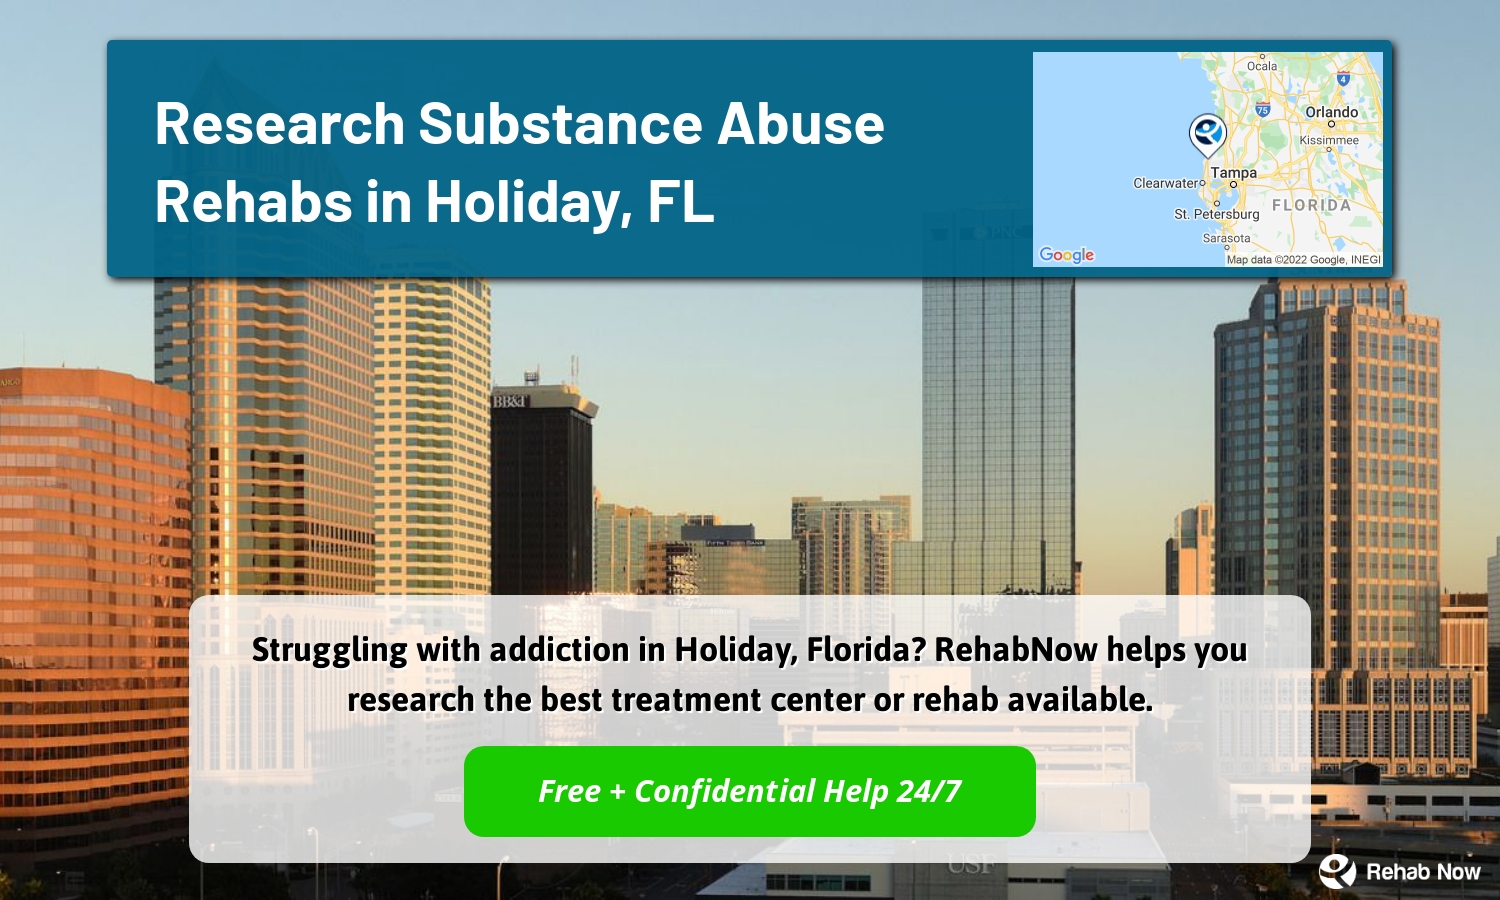 Struggling with addiction in Holiday, Florida? RehabNow helps you research the best treatment center or rehab available.